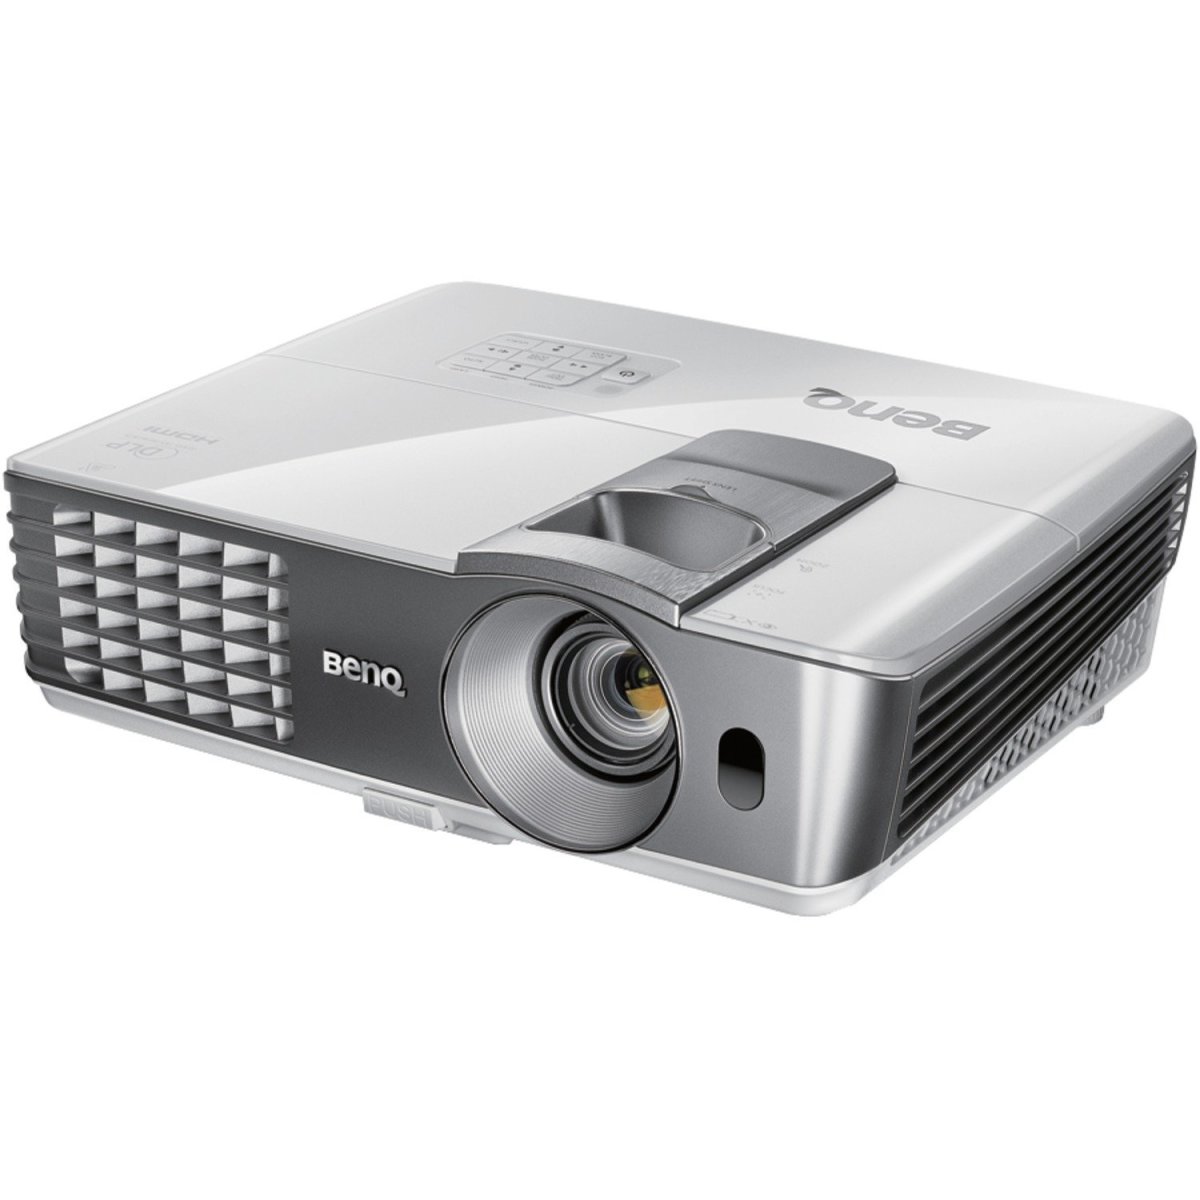 What's Wrong with the BenQ W1070 3D Home Theater Projector?